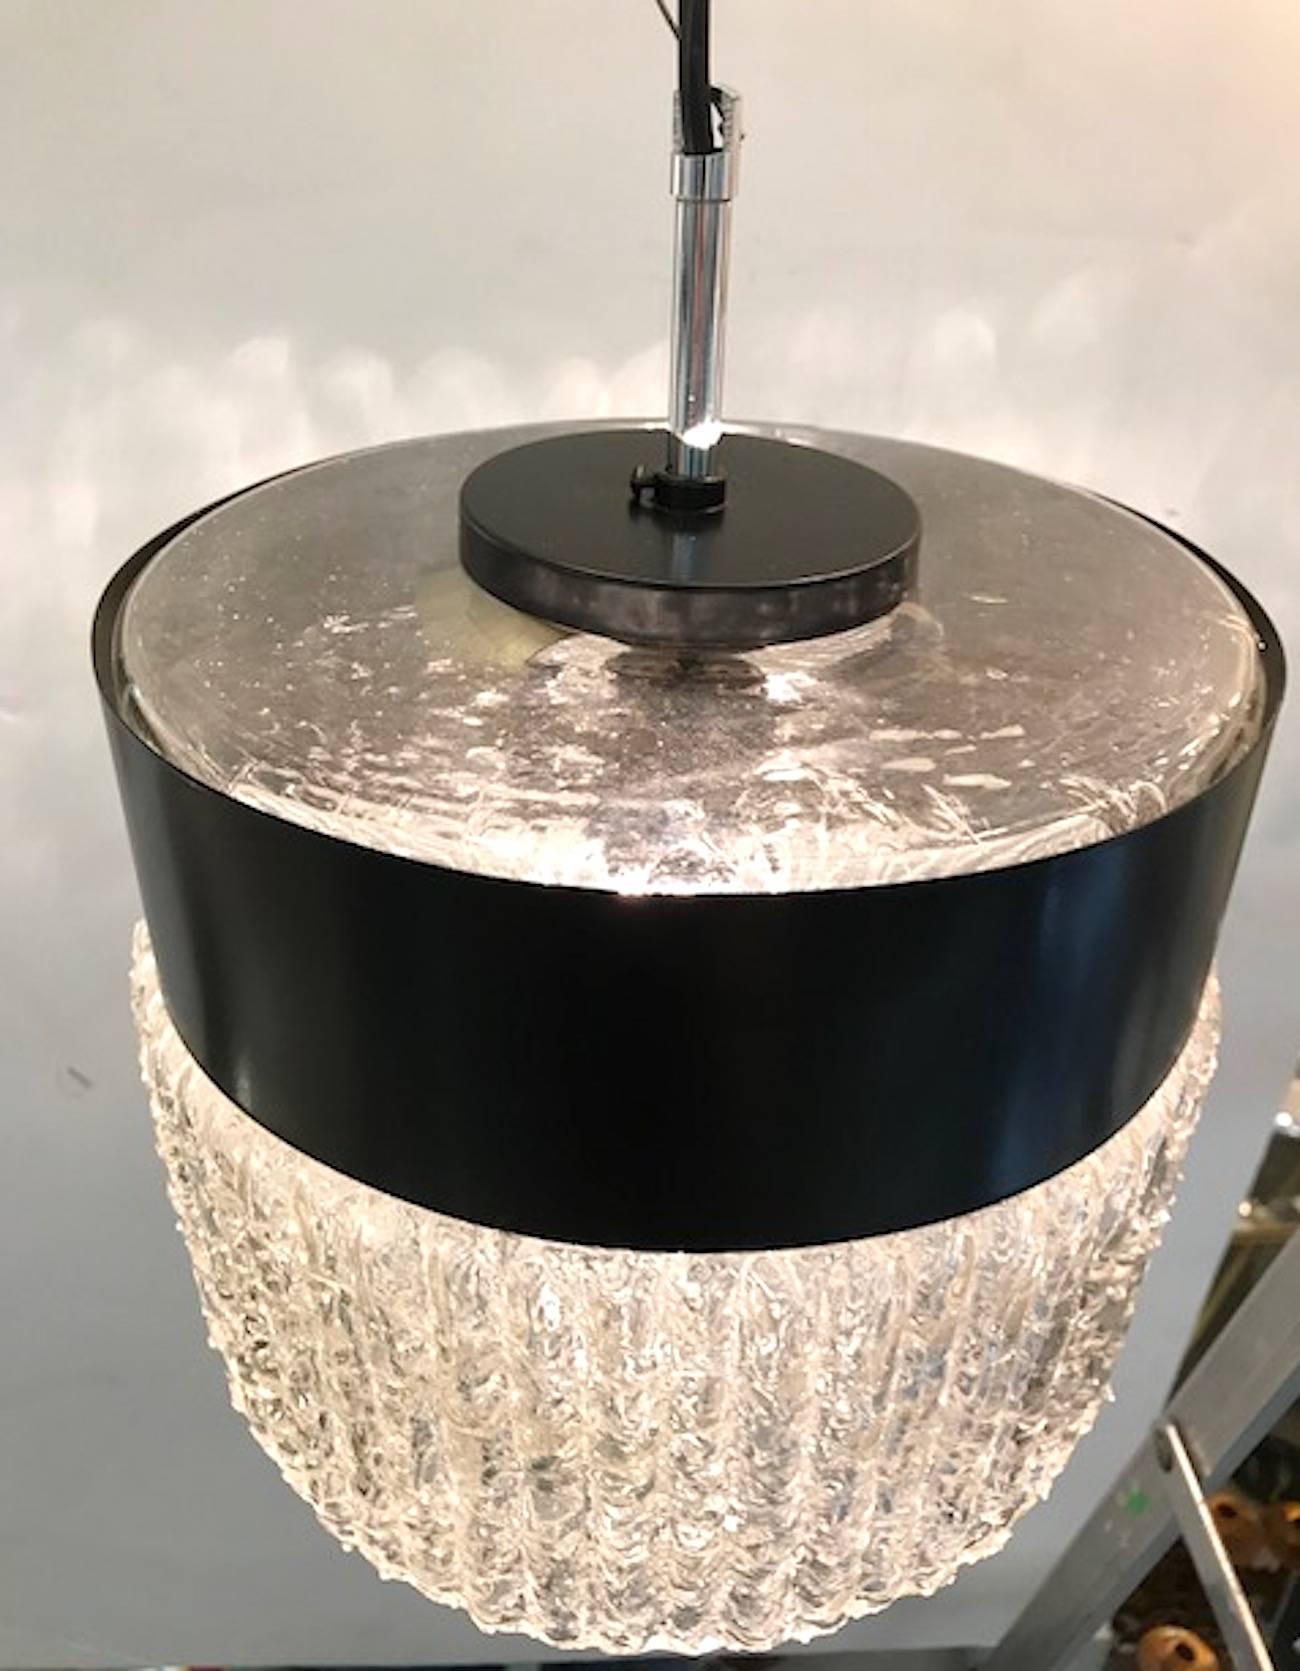 A circa 1950-1960 Italian pendant light in the manner of Stilnovo. Black enamel band sits around the top of at the glass shade. The shade is blown and hand formed glass with textured glass and scallop sides below the band. The black enamel bands